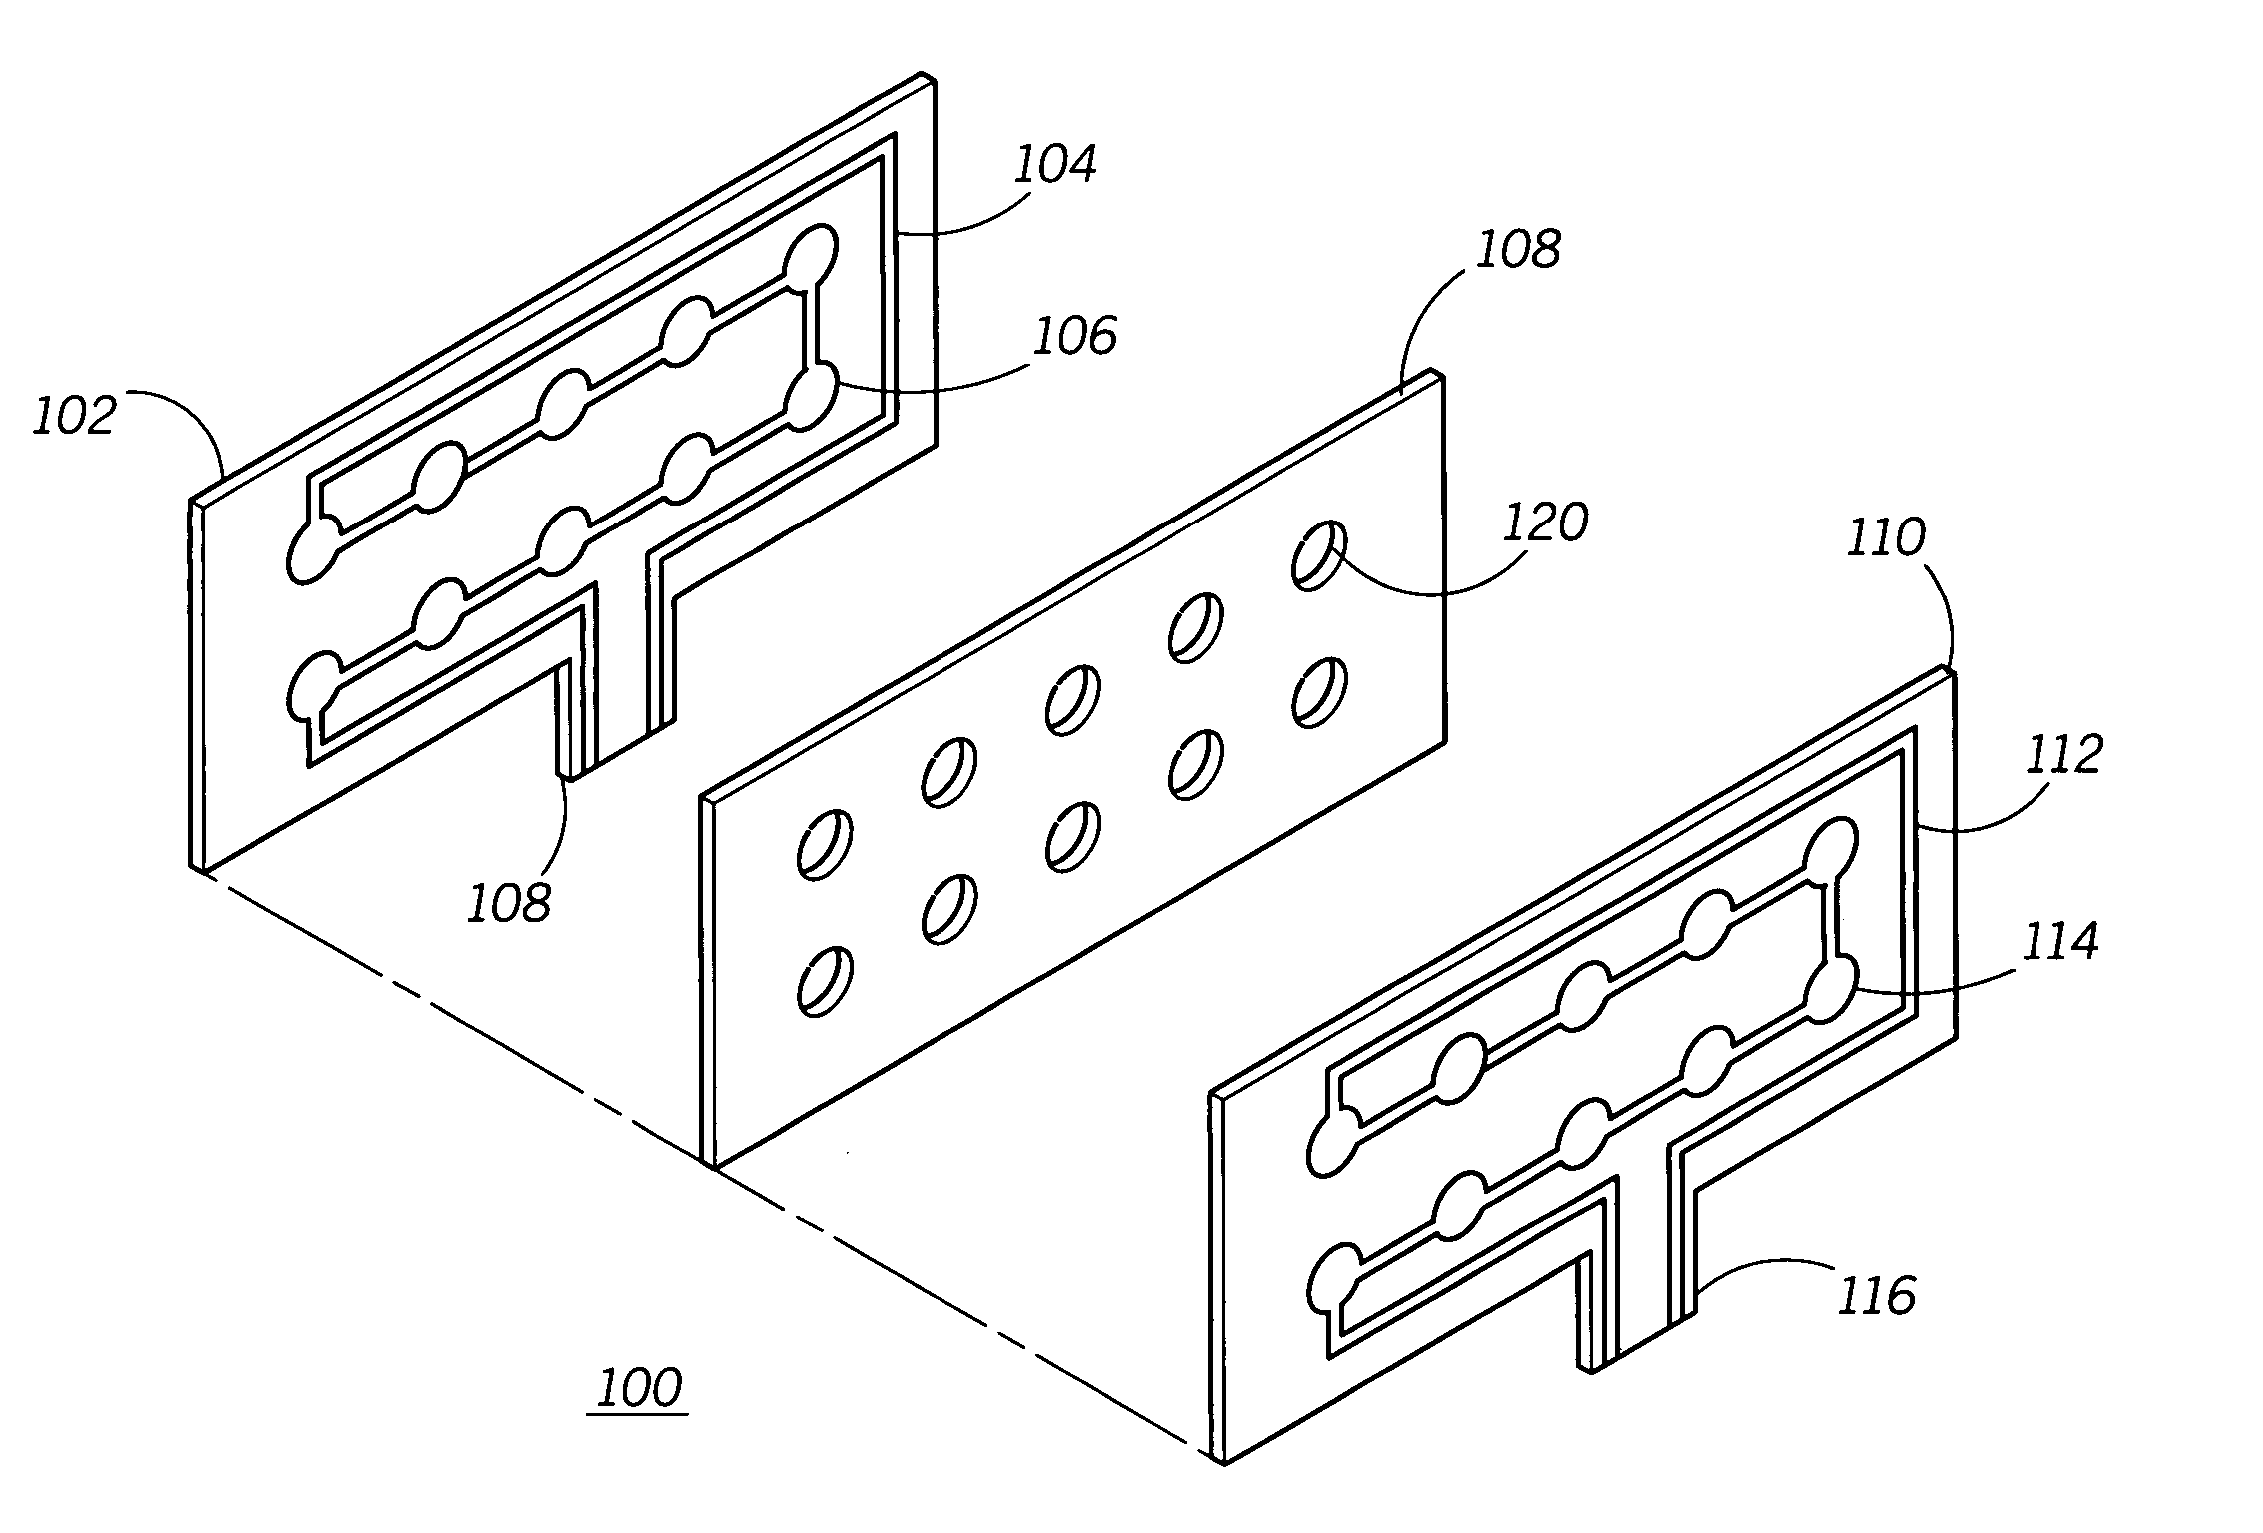 Touch screen assembly and display for an electronic device